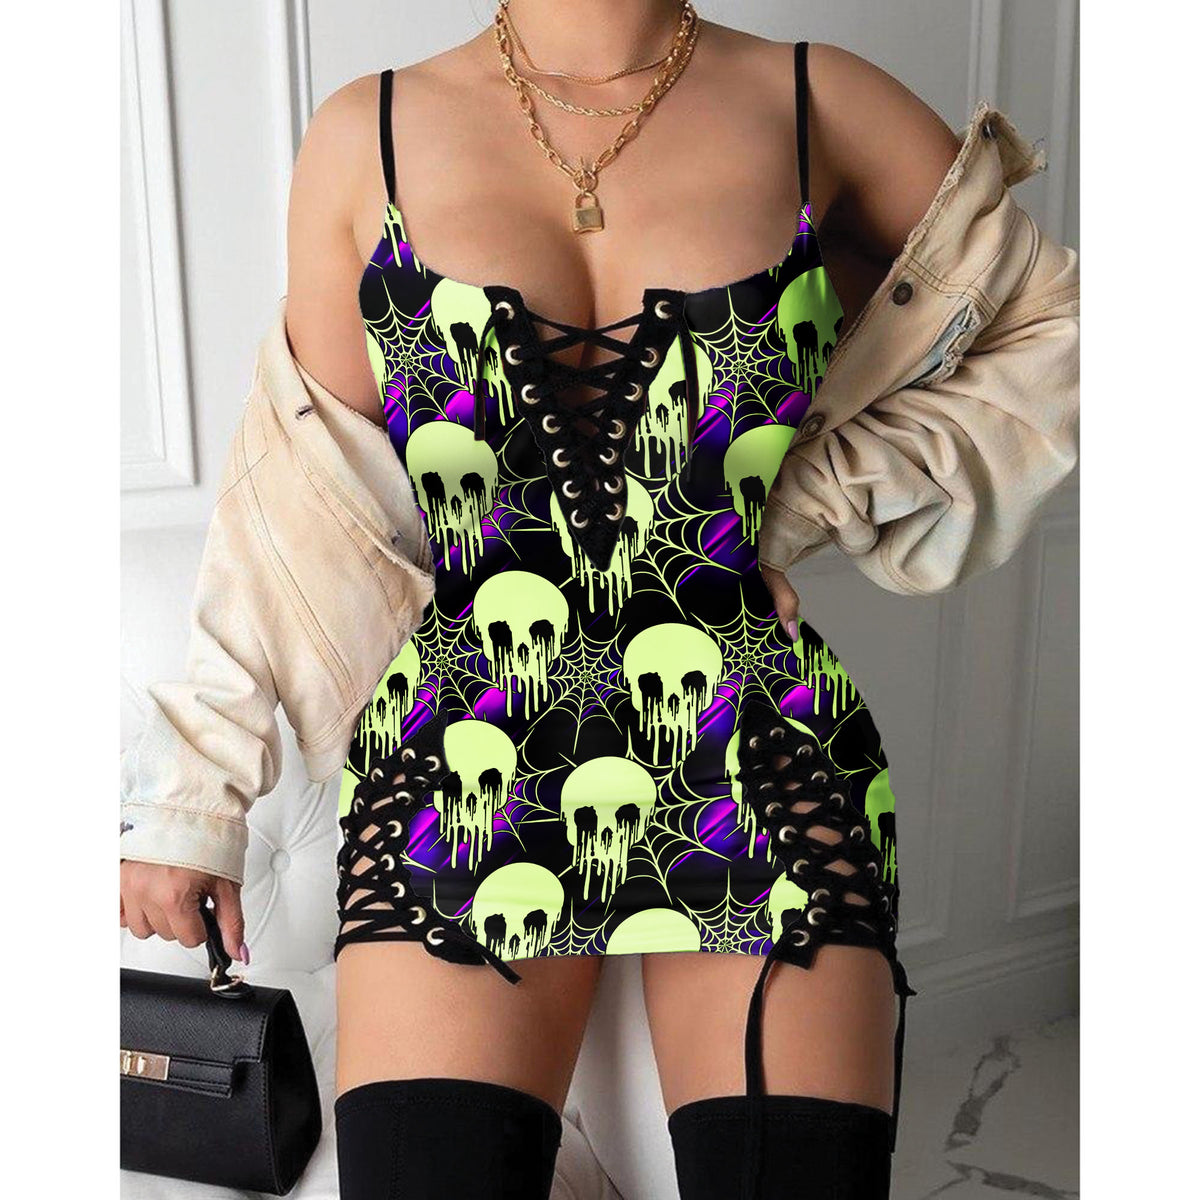 Express your personal style with the Hot Gothic Dress, a timeless piece featuring a unique Green Skull Spider, perfect for enhancing your daily fashion routine.